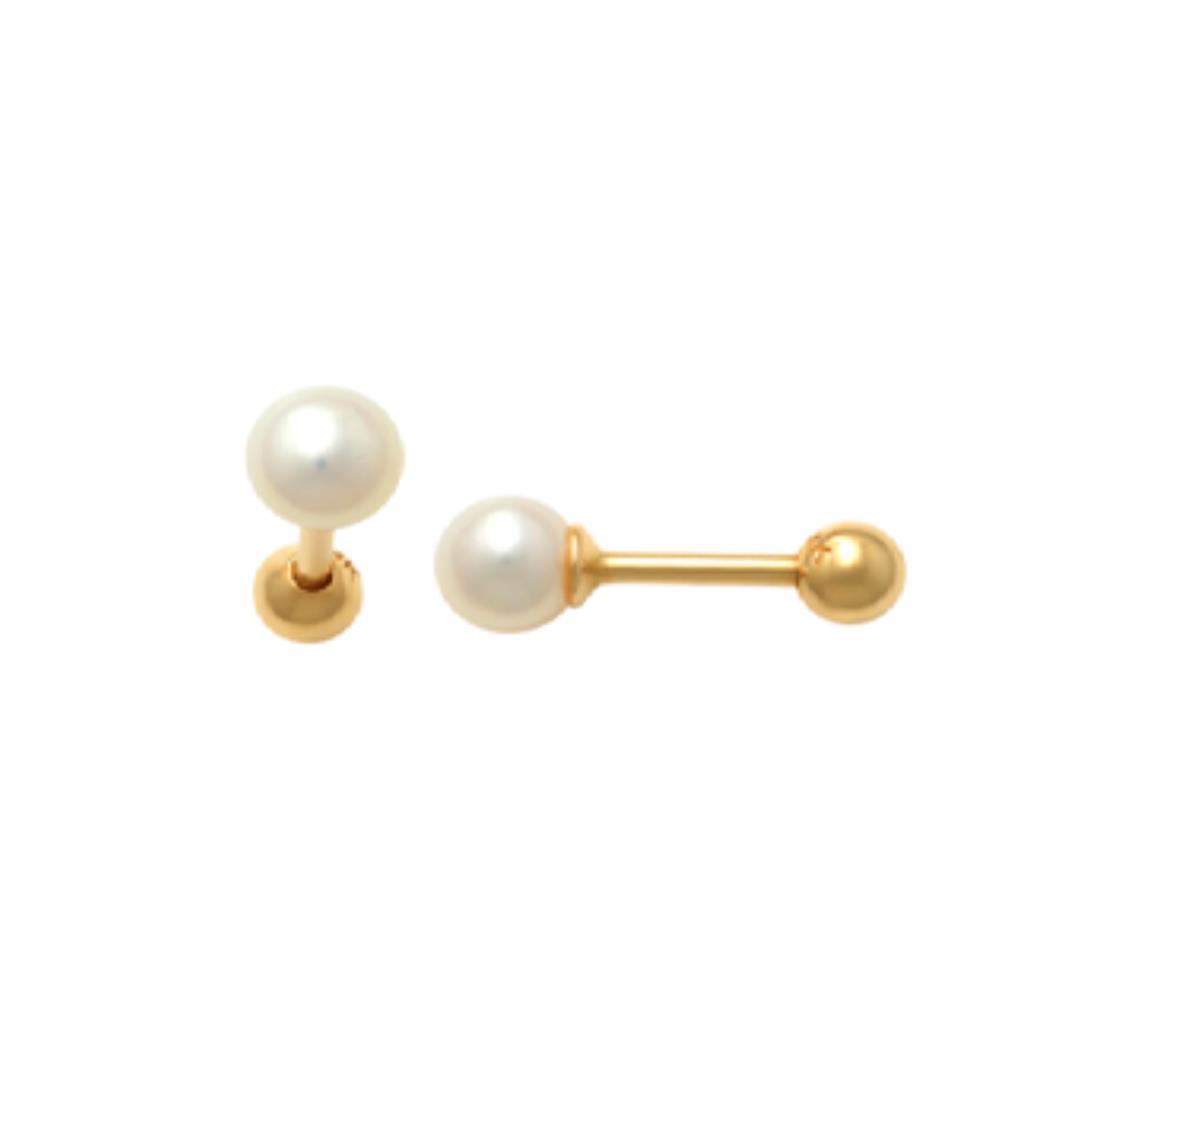 14K Yellow Gold 4mm Freshwater Pearl Nose Stud with Ball Screw-Back